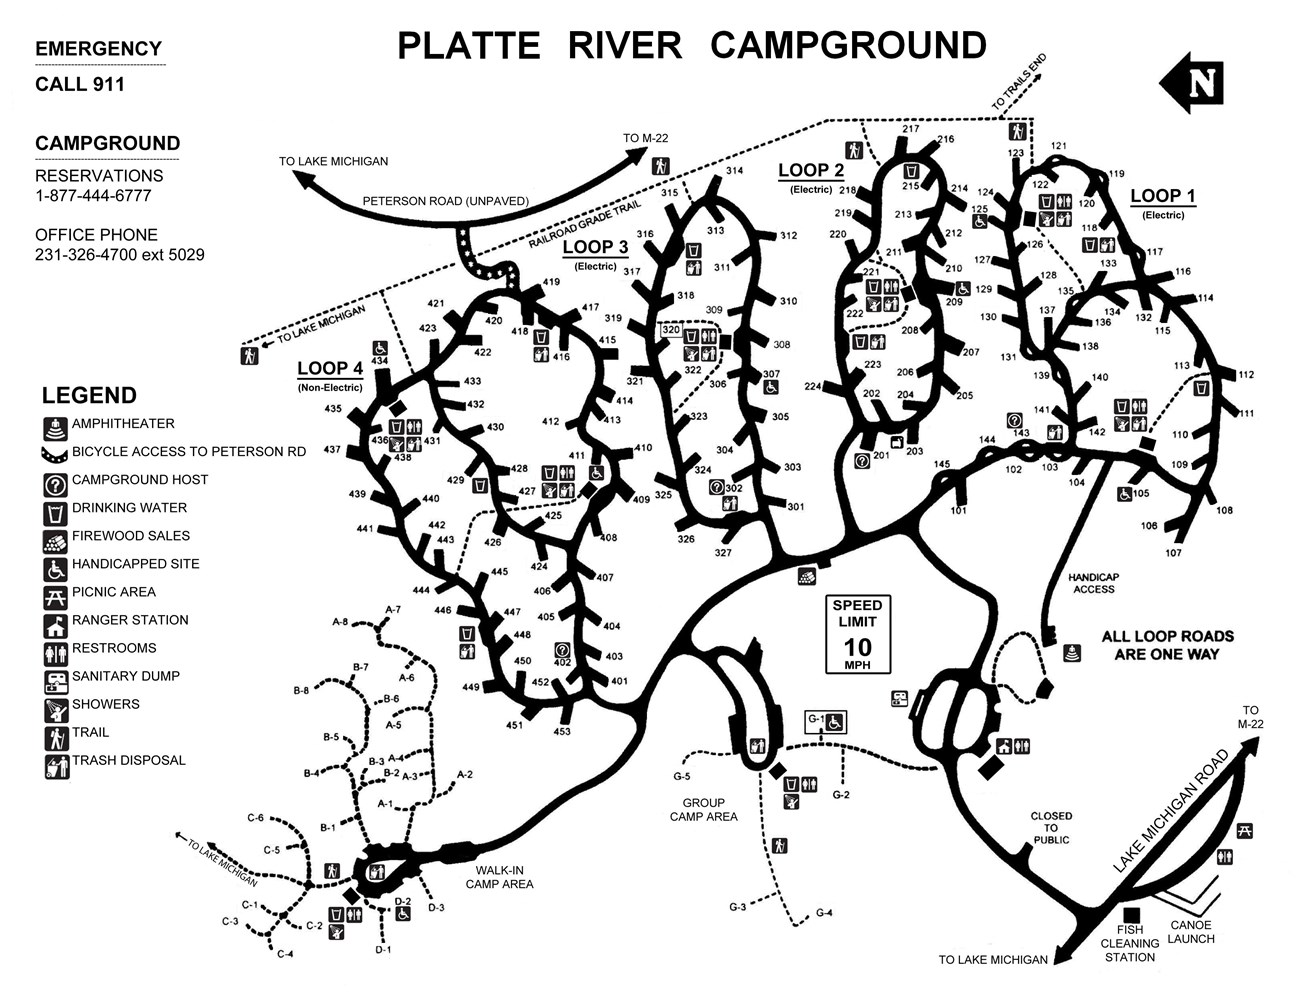 Map of Platte River Campground sites